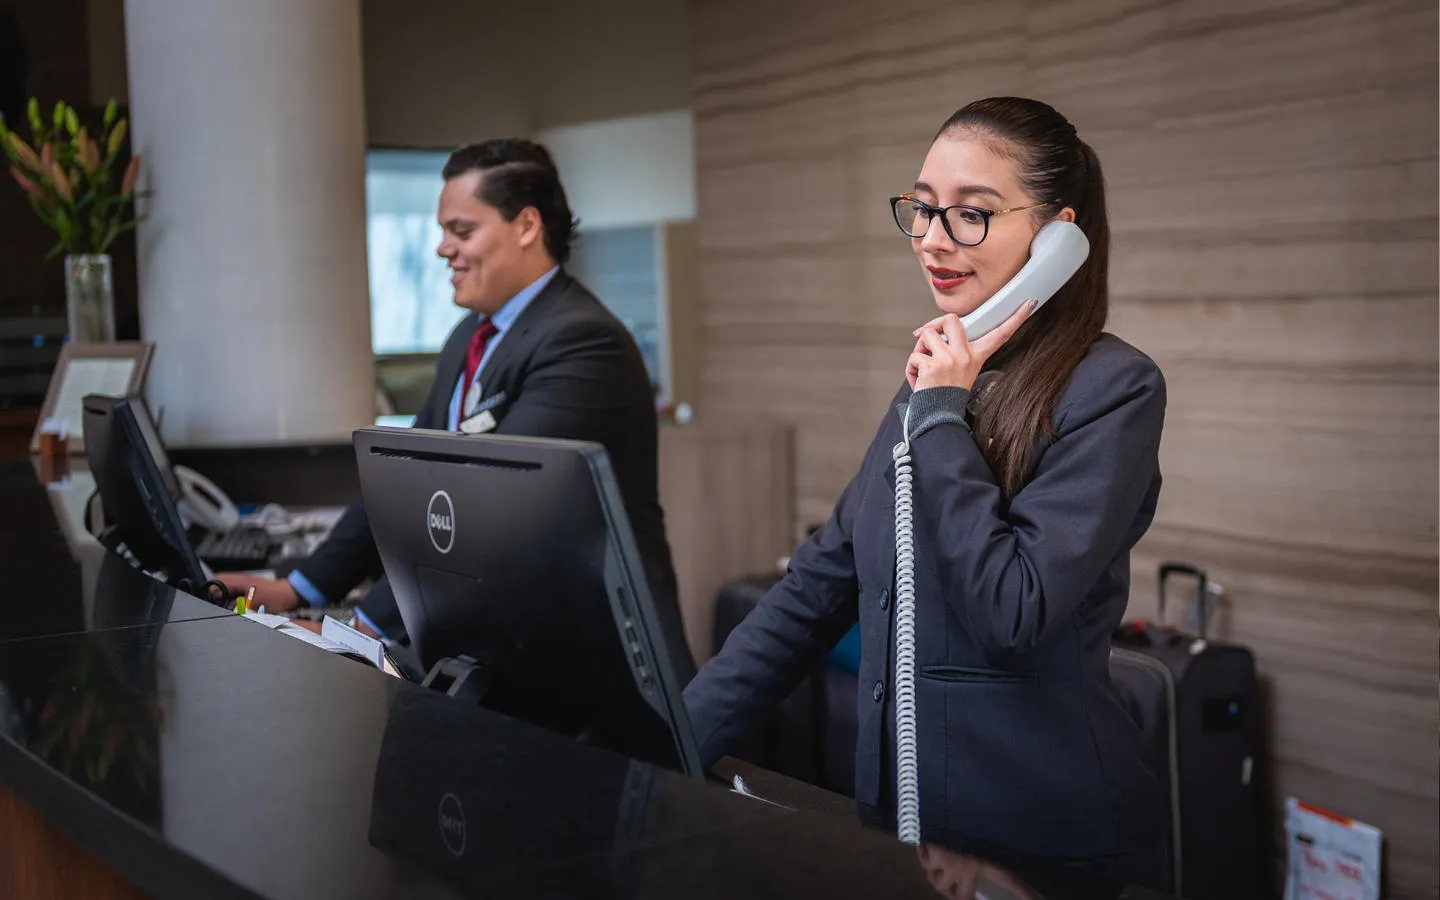 Male and female receptionists working on the front desk of a hotel